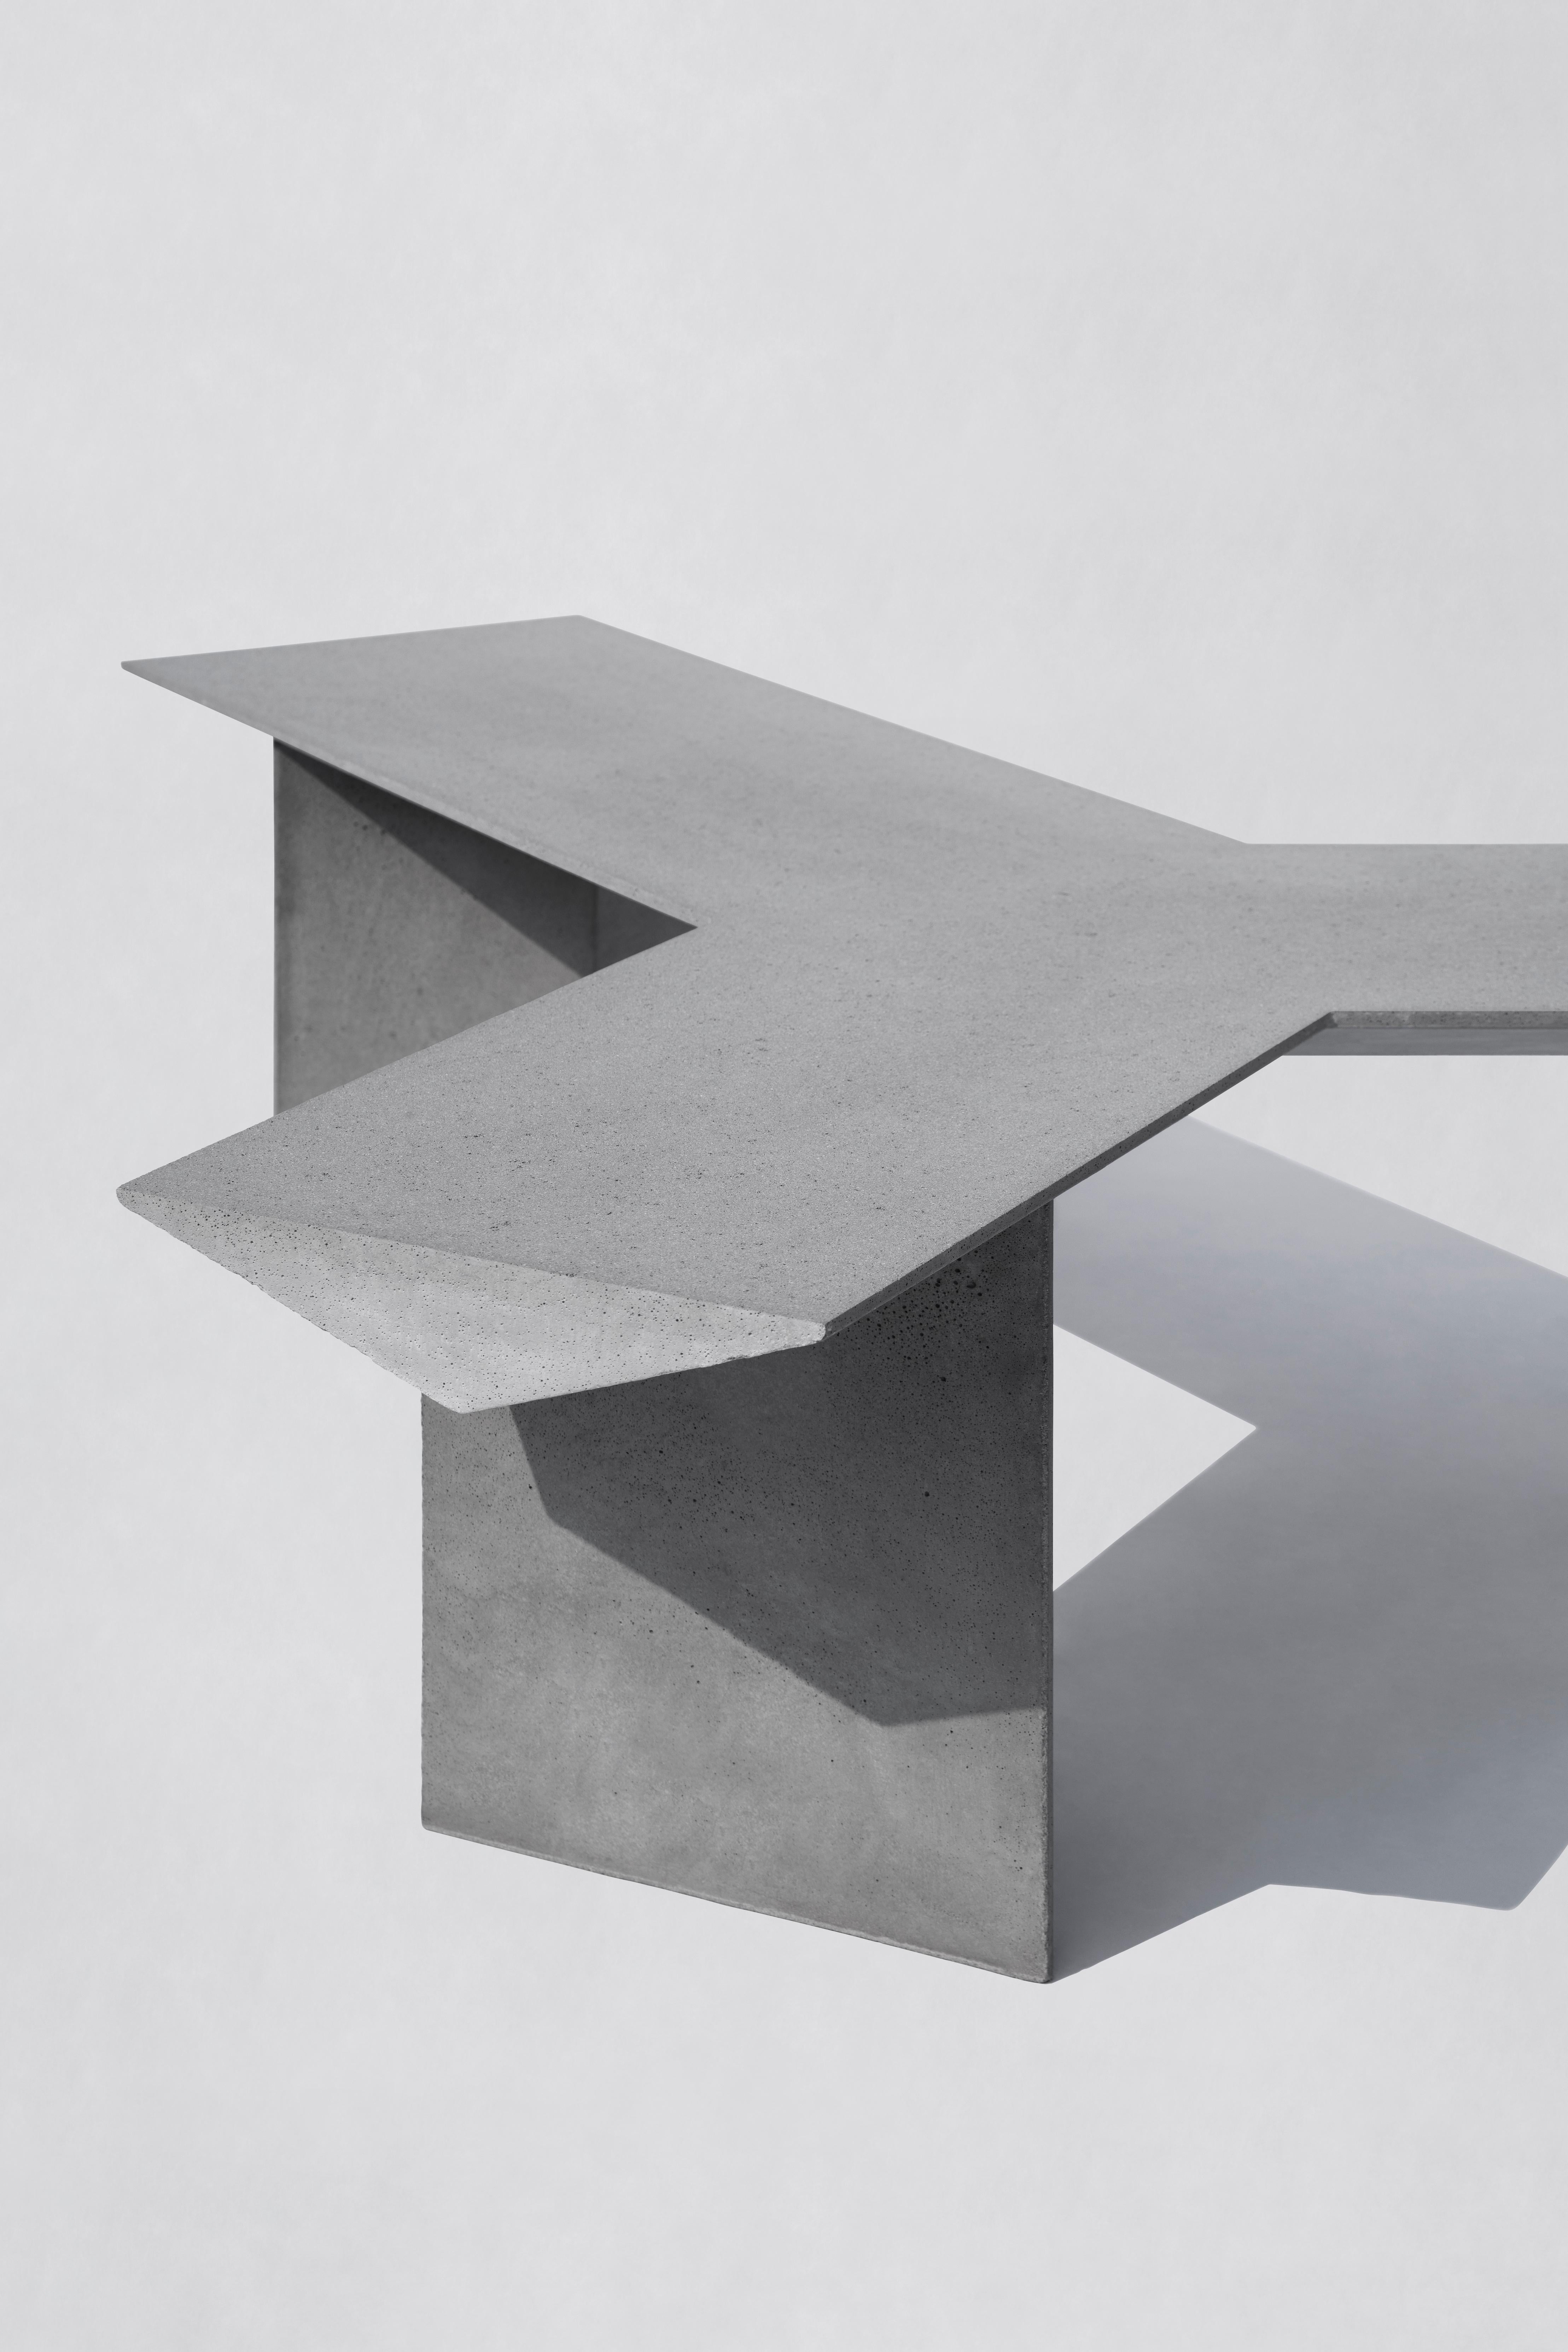 Chinese Contemporary Bench 'Liang 2' Made of Concrete, by Bentu Design For Sale